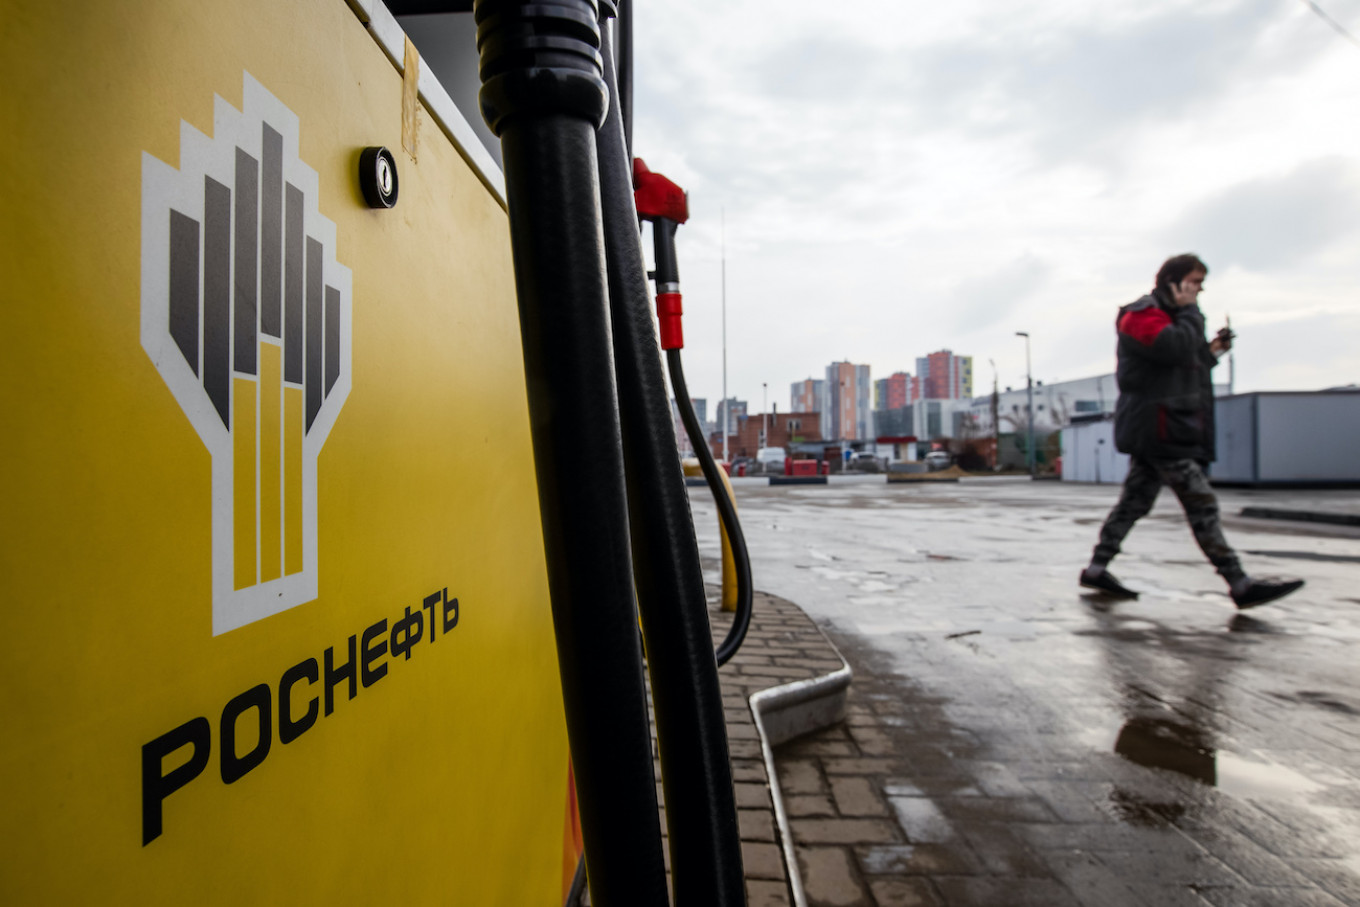 U.S., European Oil Majors Could Create Supply Crisis With Renewables Push – Russia’s Rosneft